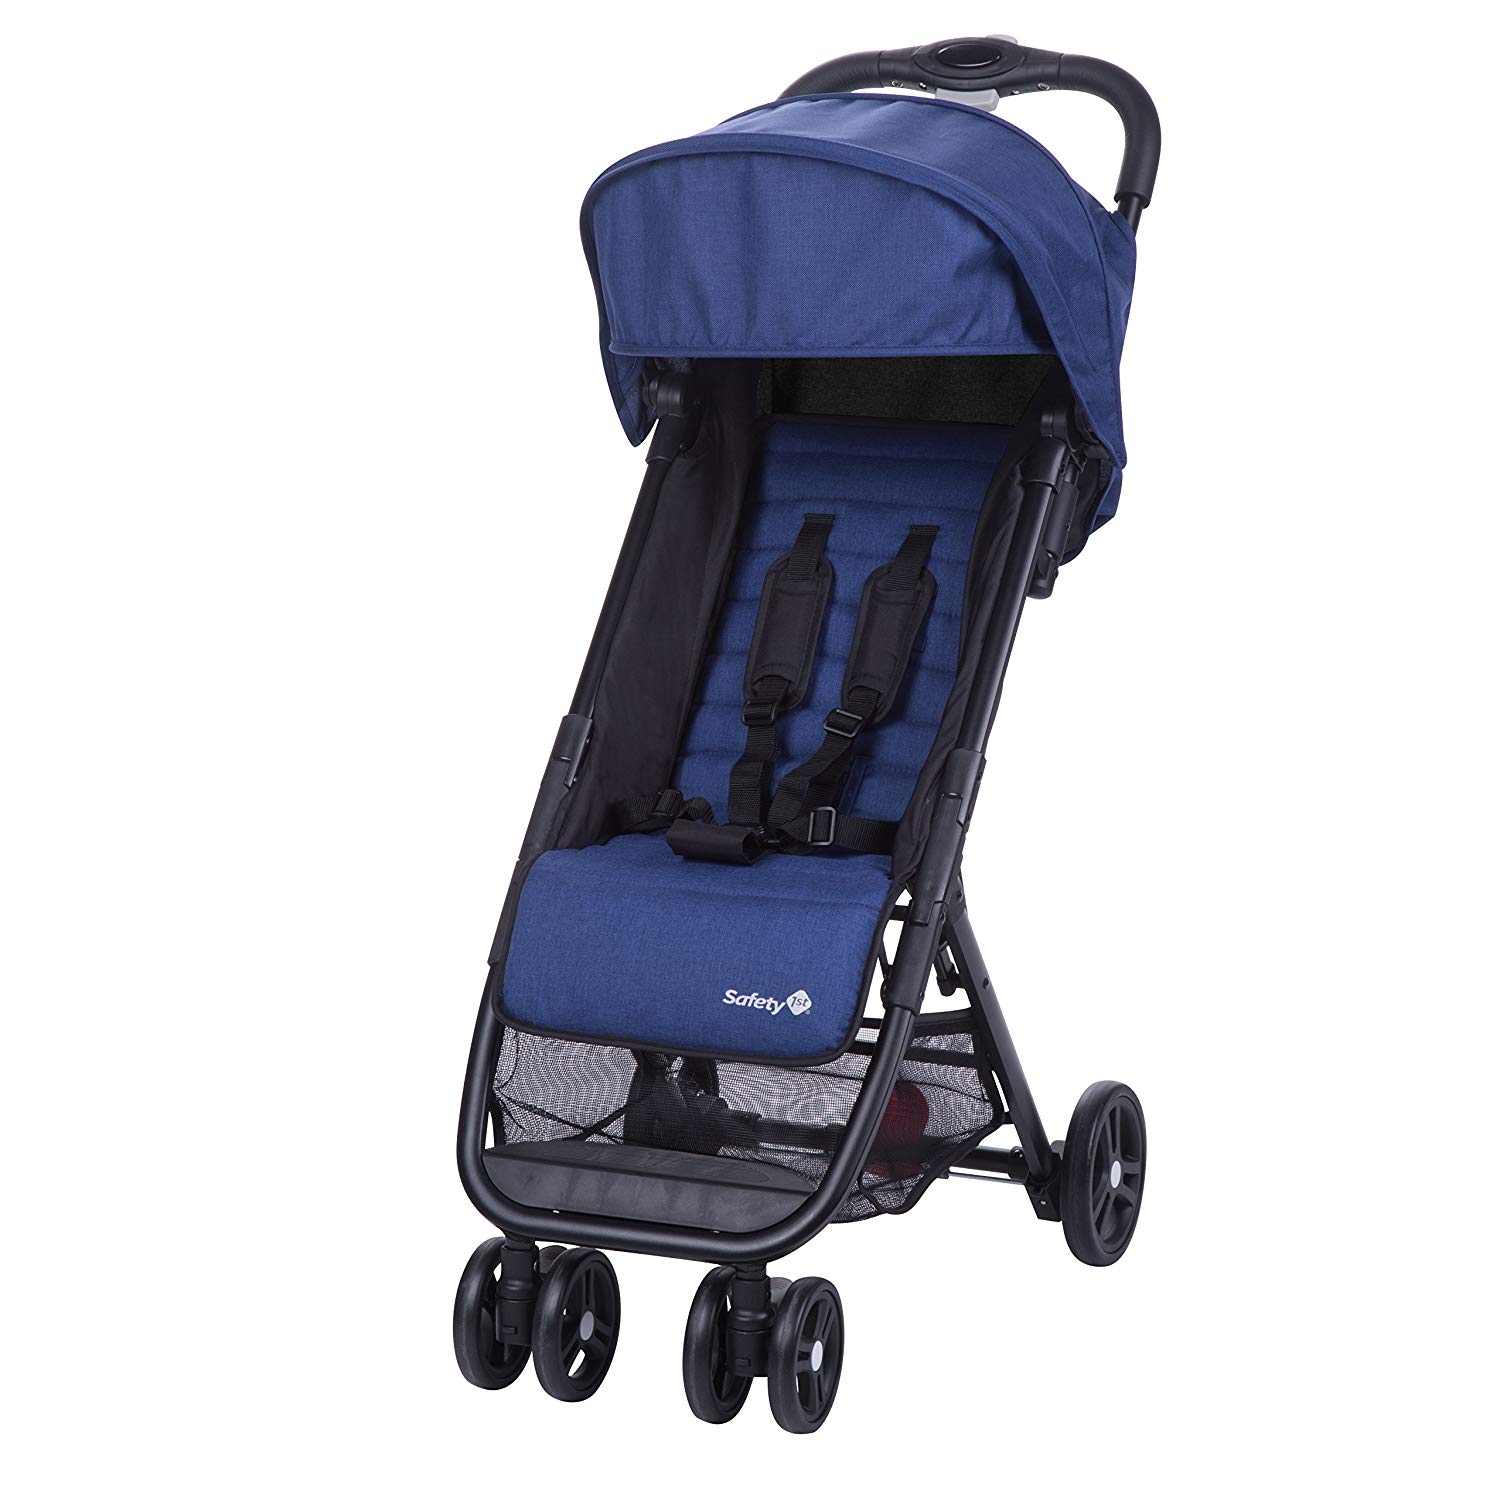 Safety 1st Teeny Buggy Ultra Compact Folding Pushchair Includes Matching Carry Bag, Ideal for Travel or the City, Can be Used from Approx. 6 Months to Approx. 3 Years, Blue Chic (Blue)